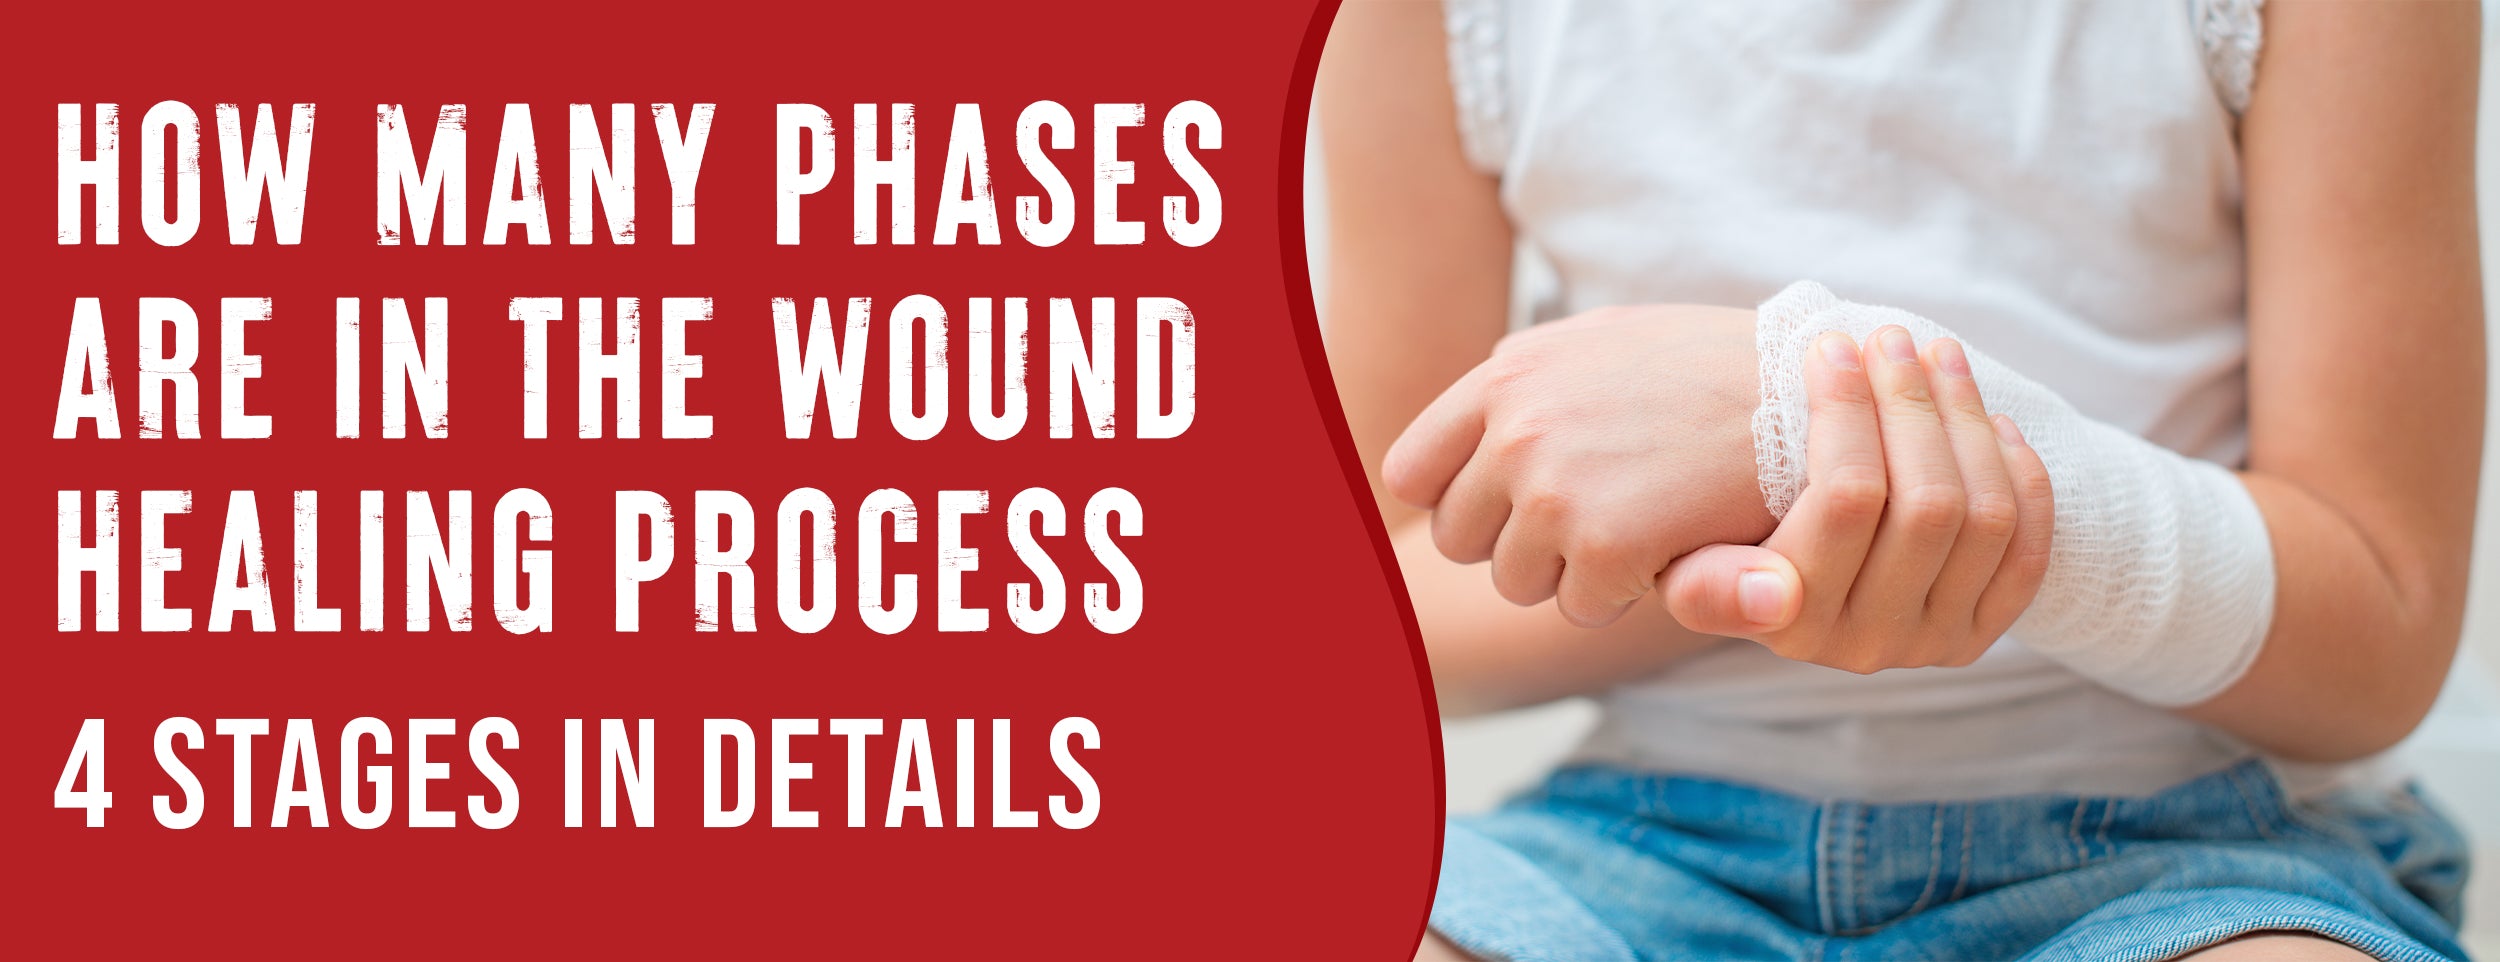 The wound healing process has four phases: